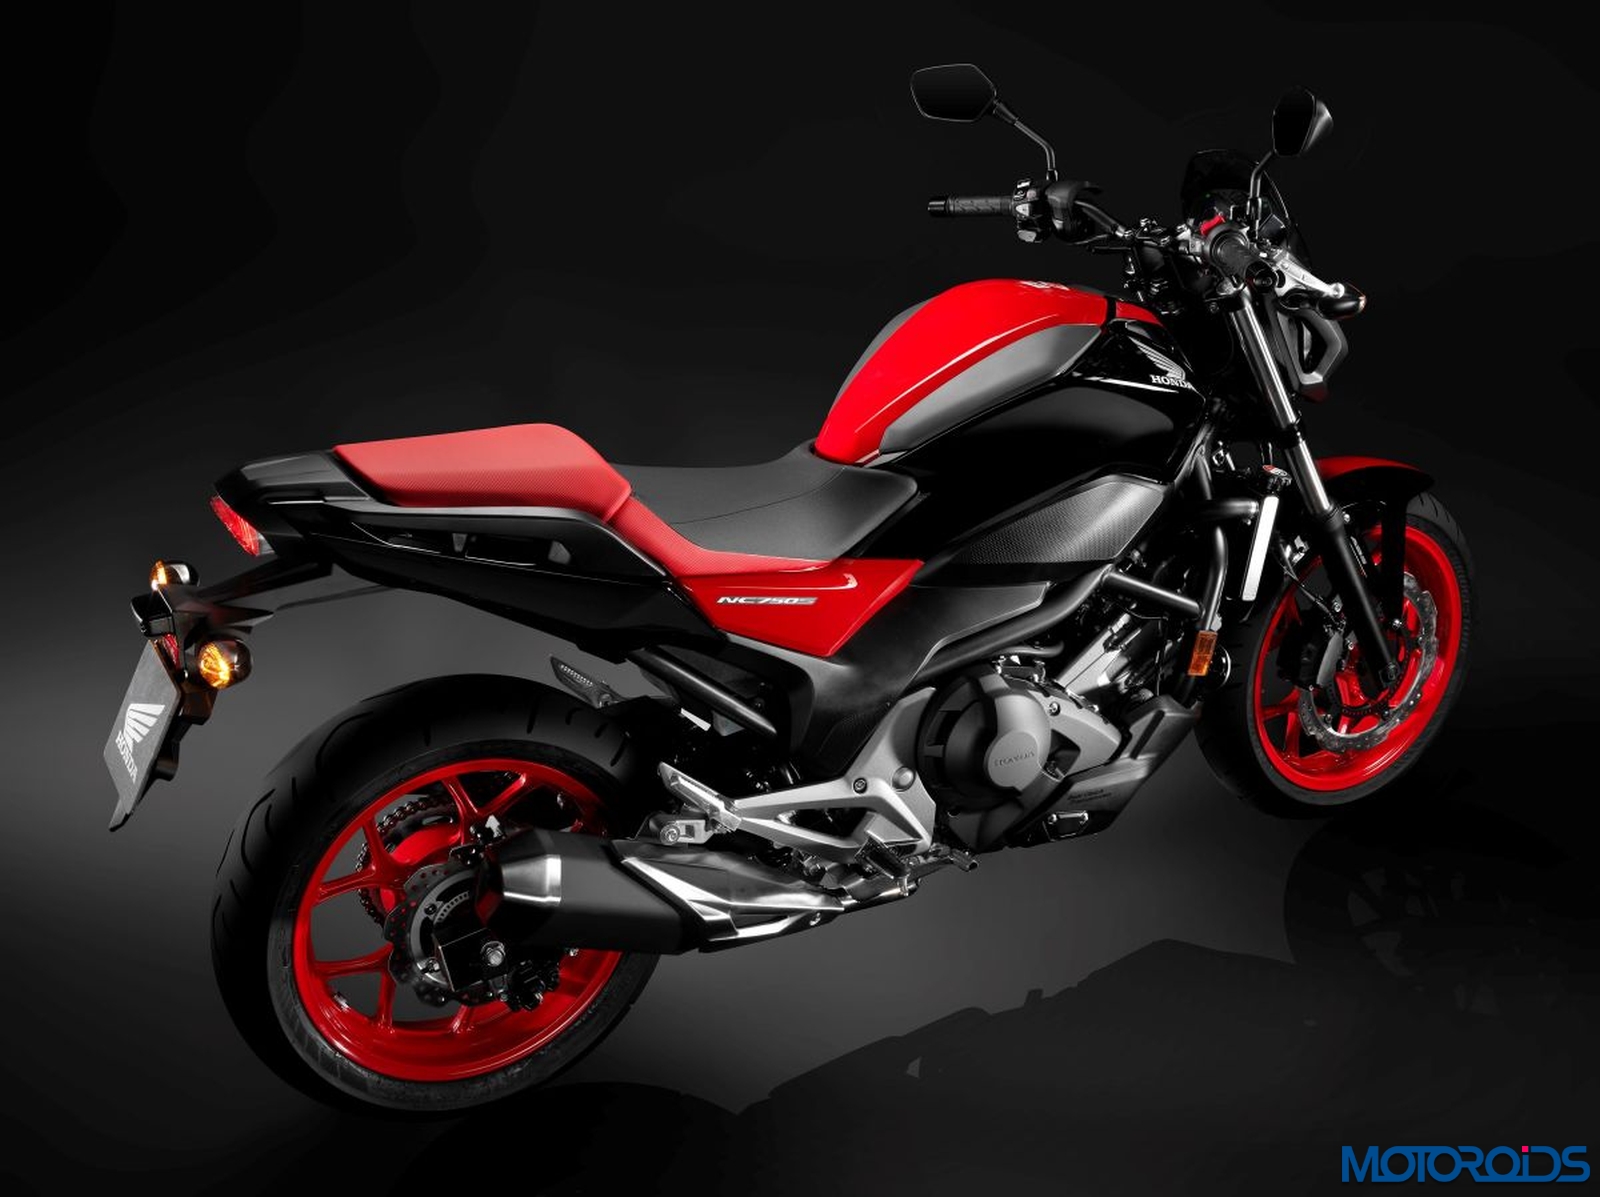 Eicma 2015 2016 Honda Nc750s Unveiled The Nc750x Also Makes Its